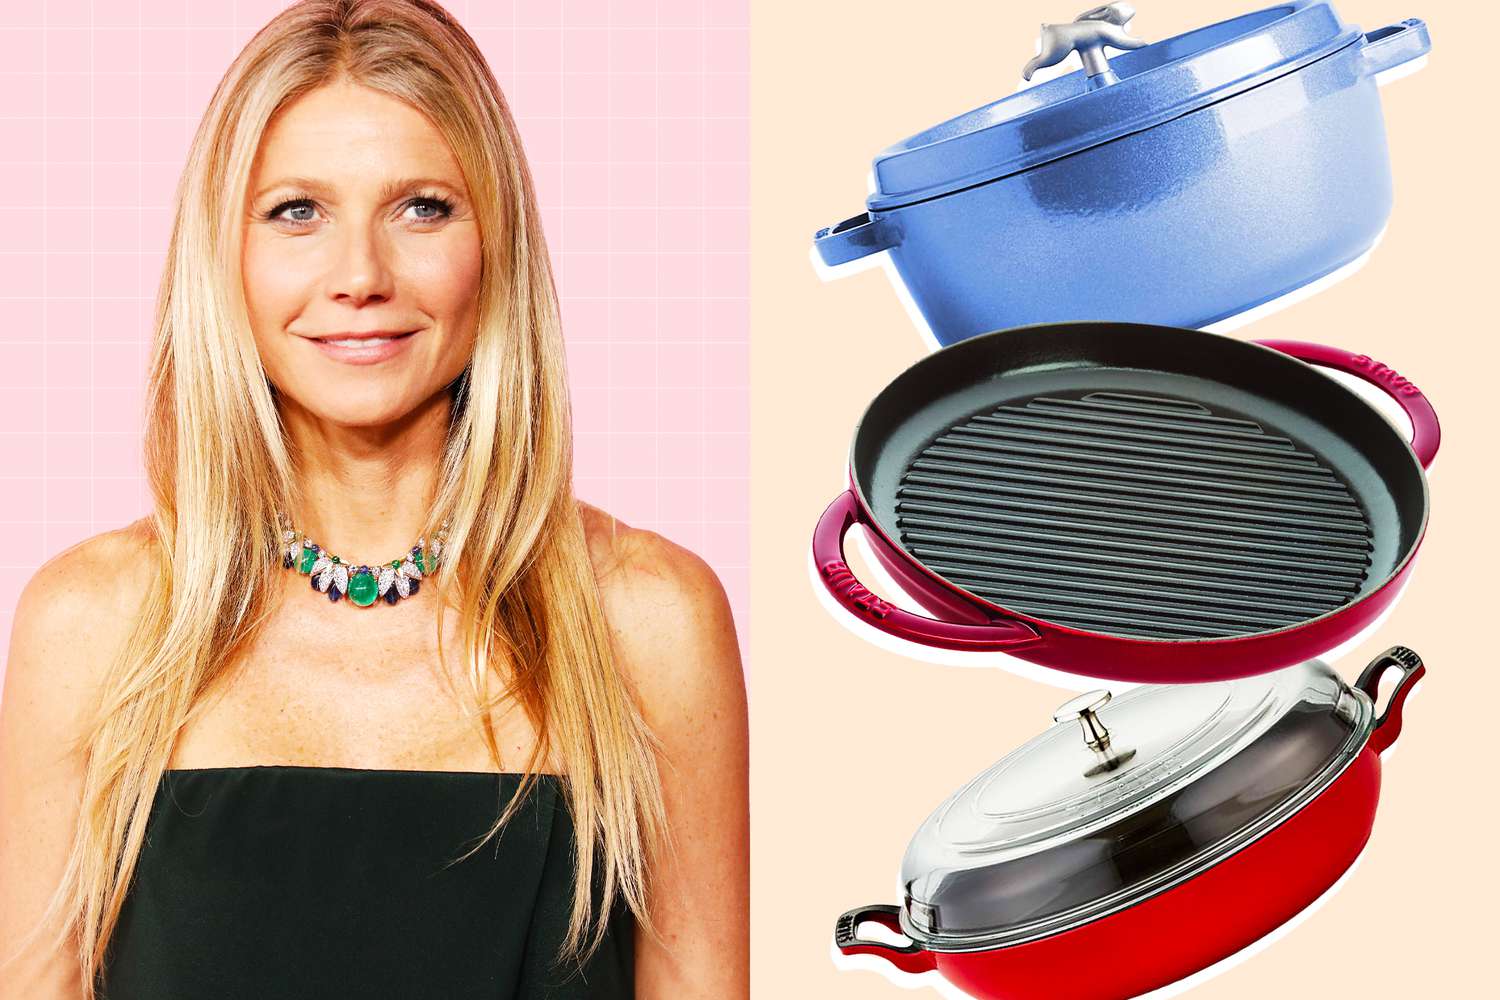 Gwyneth Paltrow next to 3 cookware items